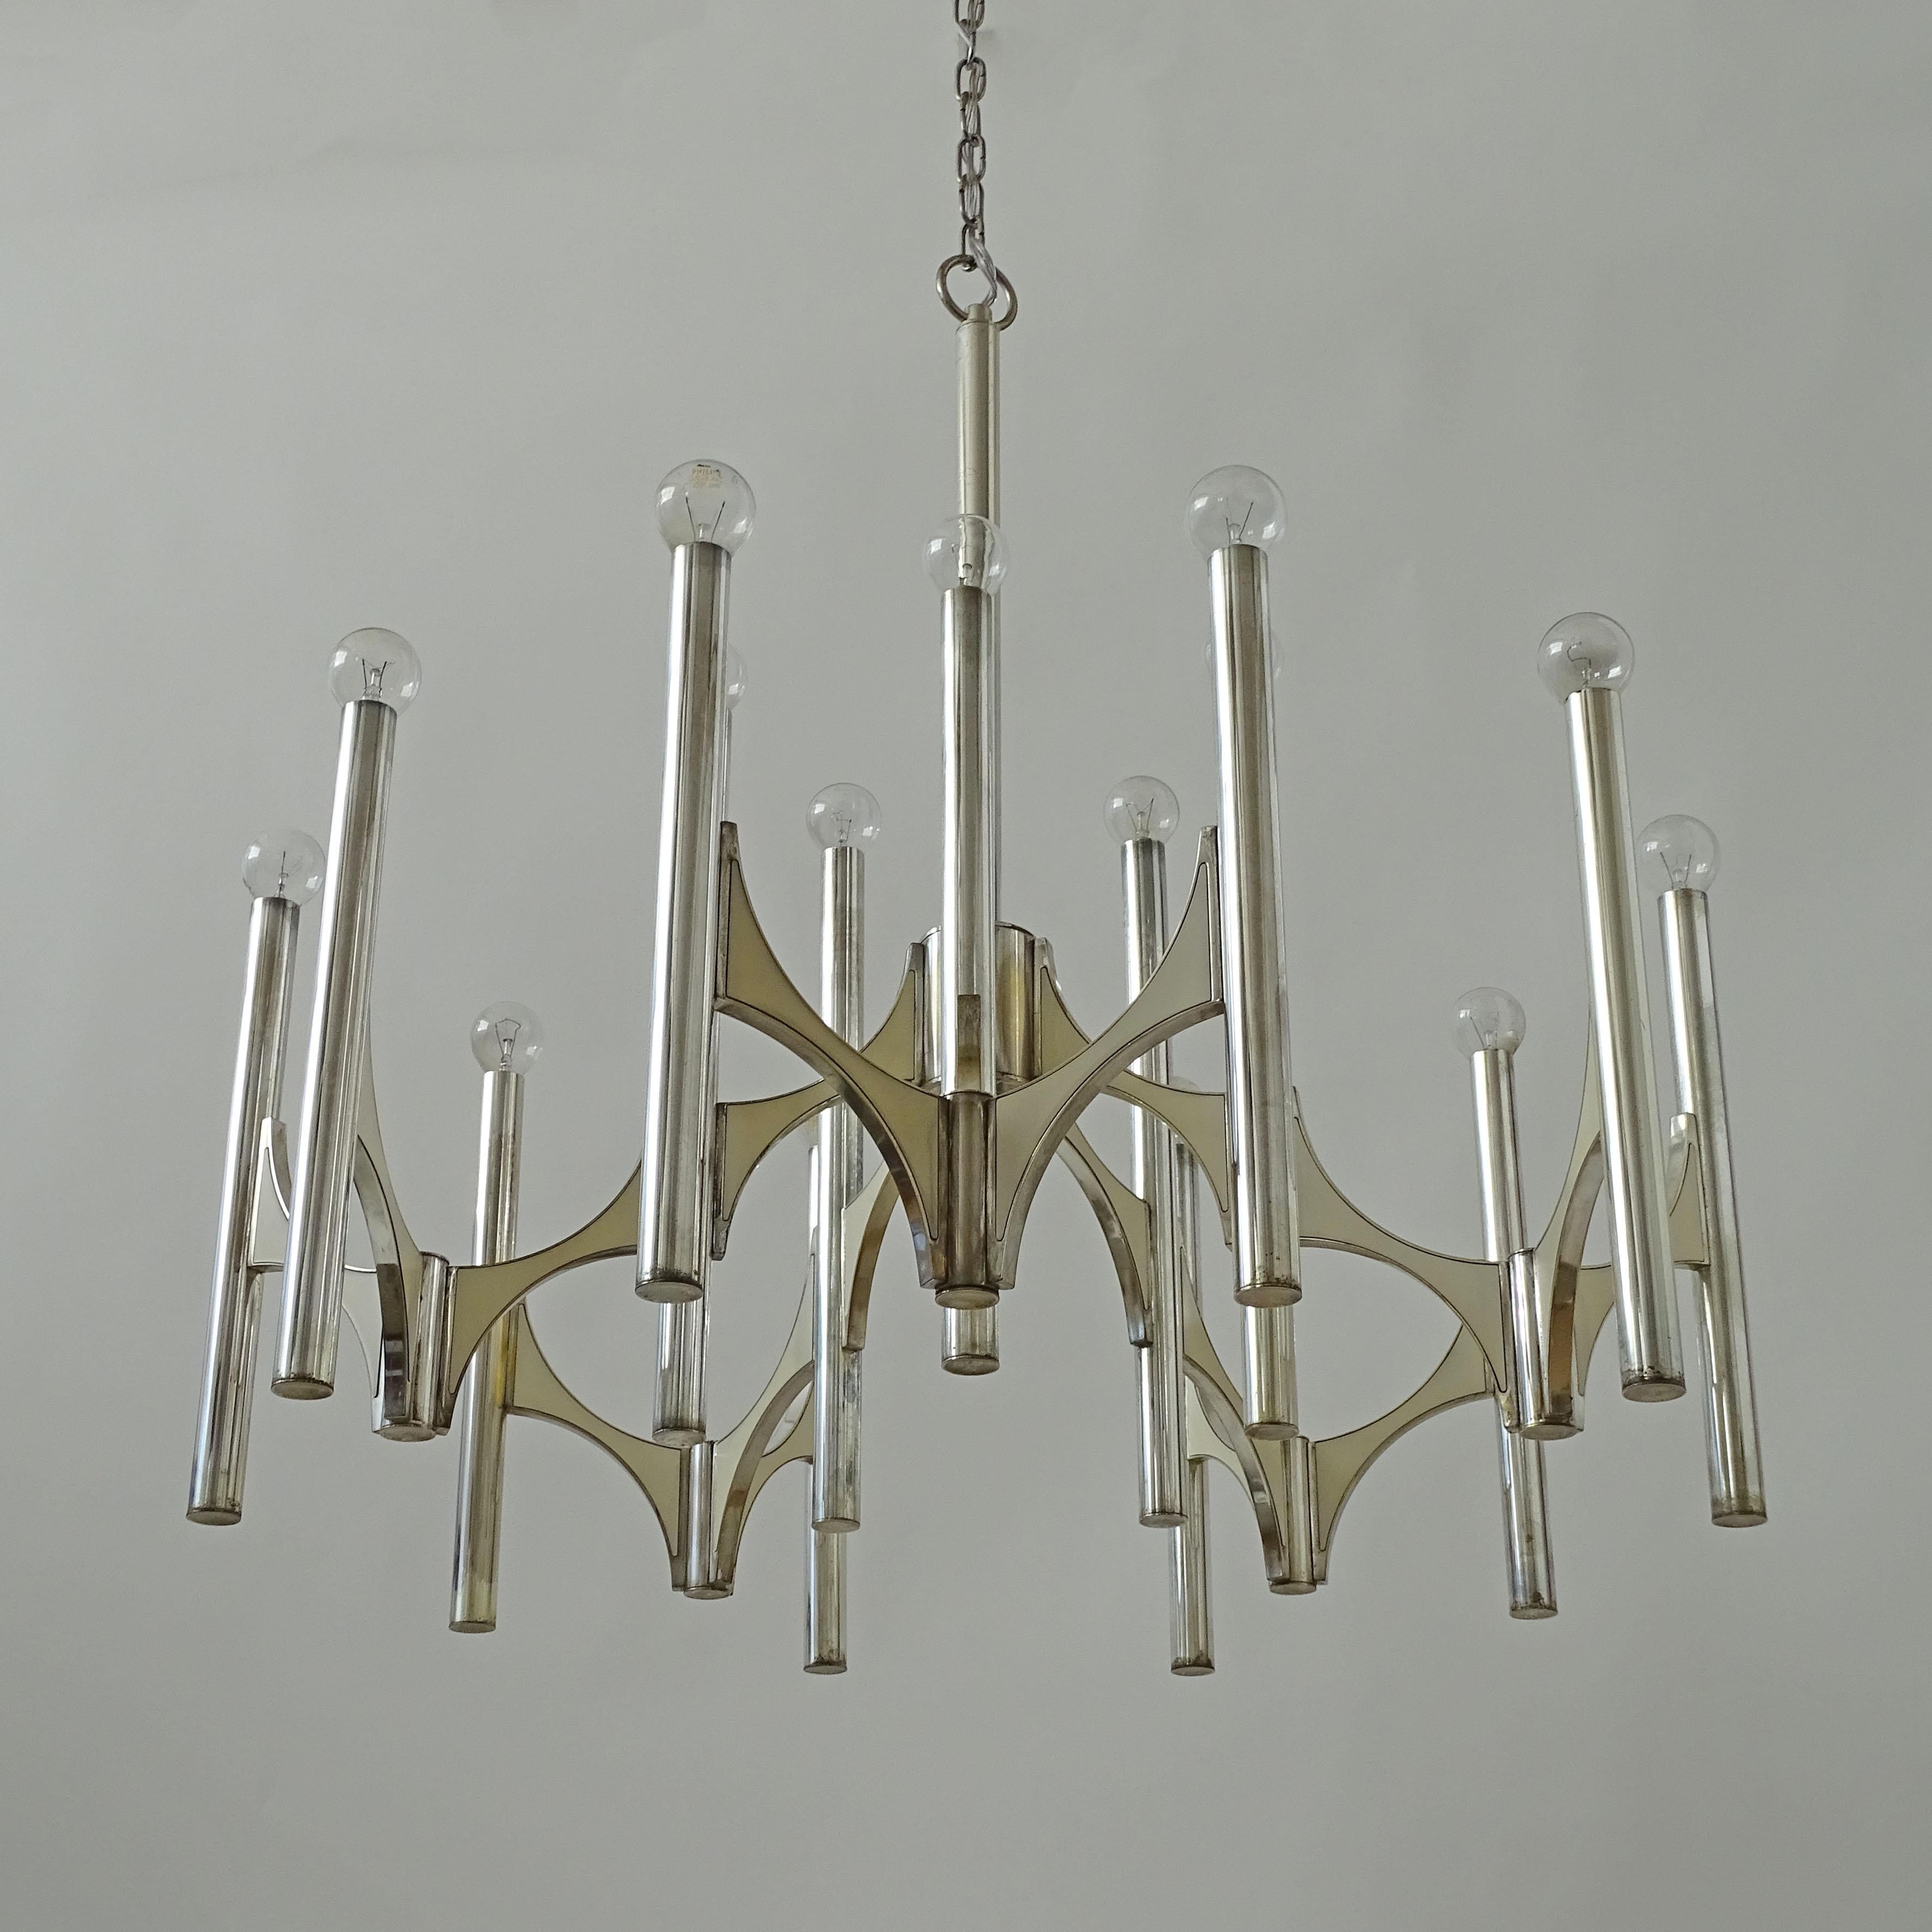 Mid-20th Century Monumental Silver Plated Brass Chandelier by Gaetano Sciolari, Italy 1960s For Sale